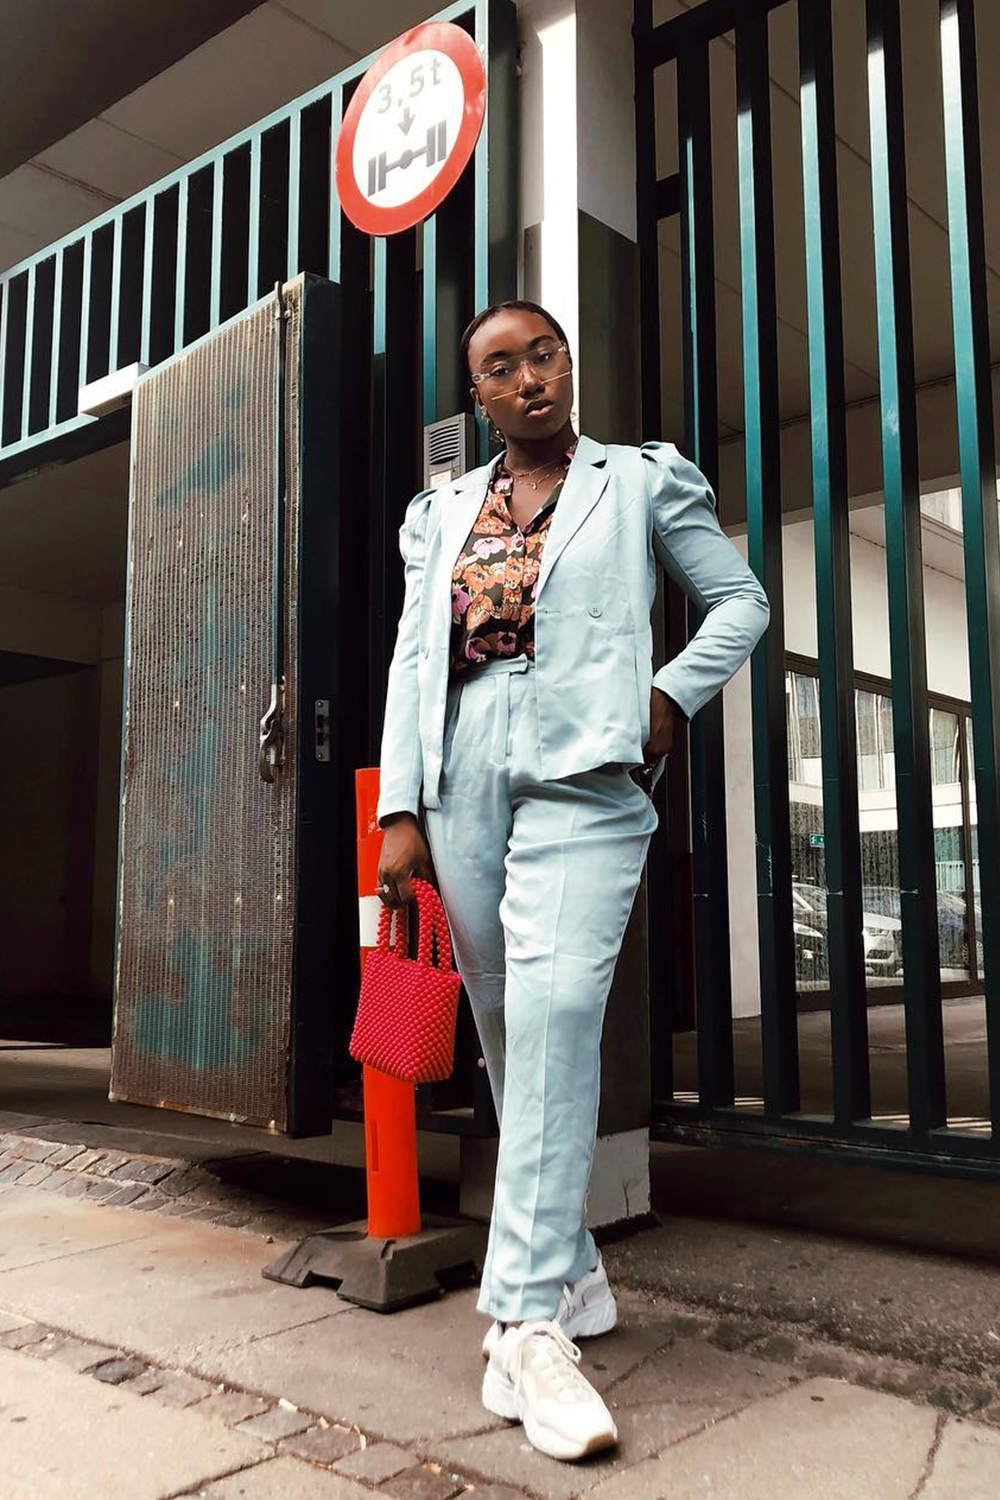 Copenhagen Fashion Week street style: Nnenna Echem wearing a blue suit and Acne trainers